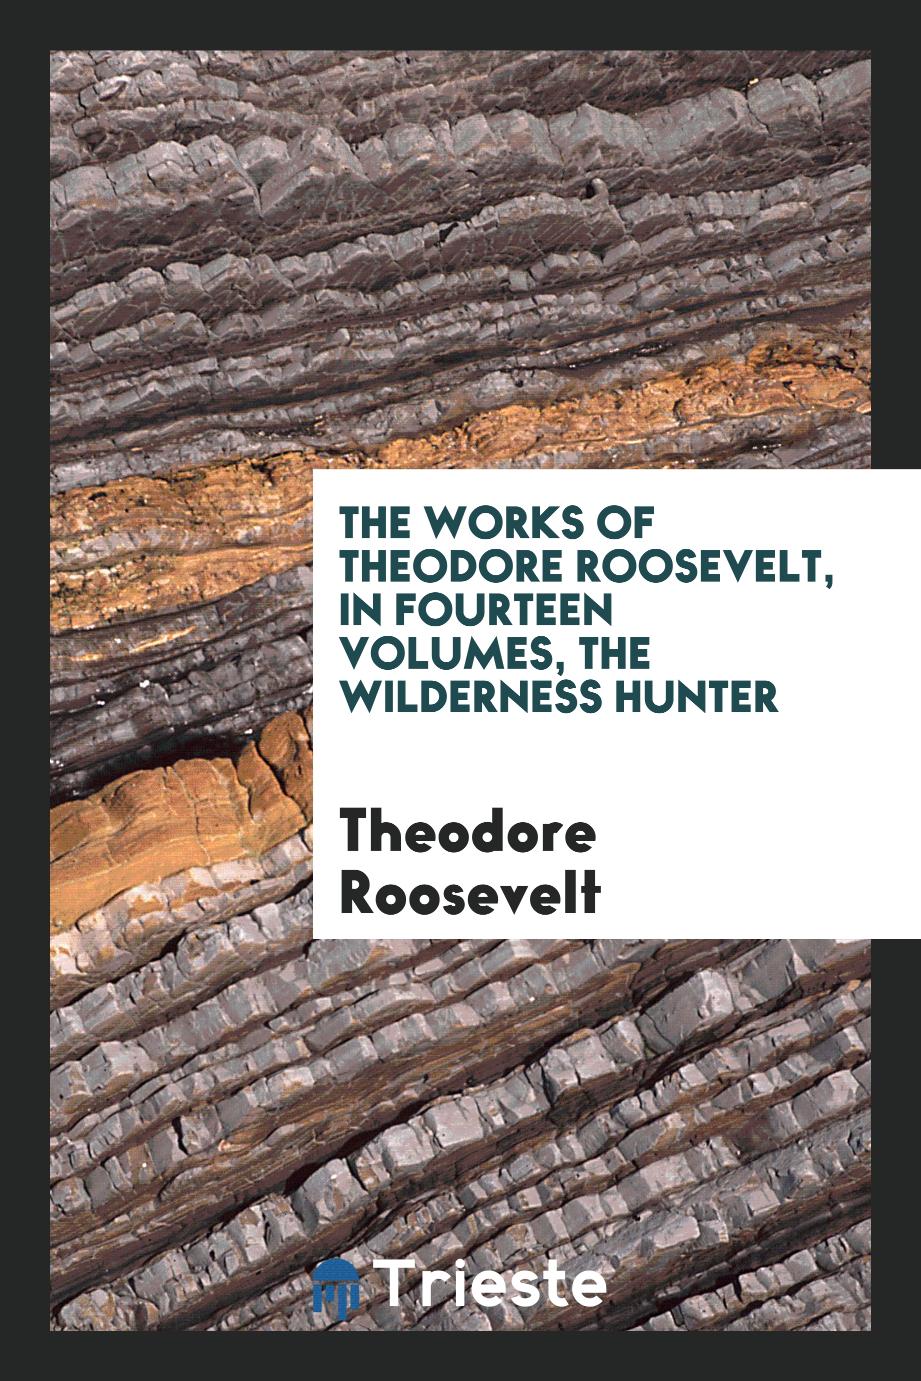 The Works of Theodore Roosevelt, in Fourteen Volumes, The Wilderness Hunter